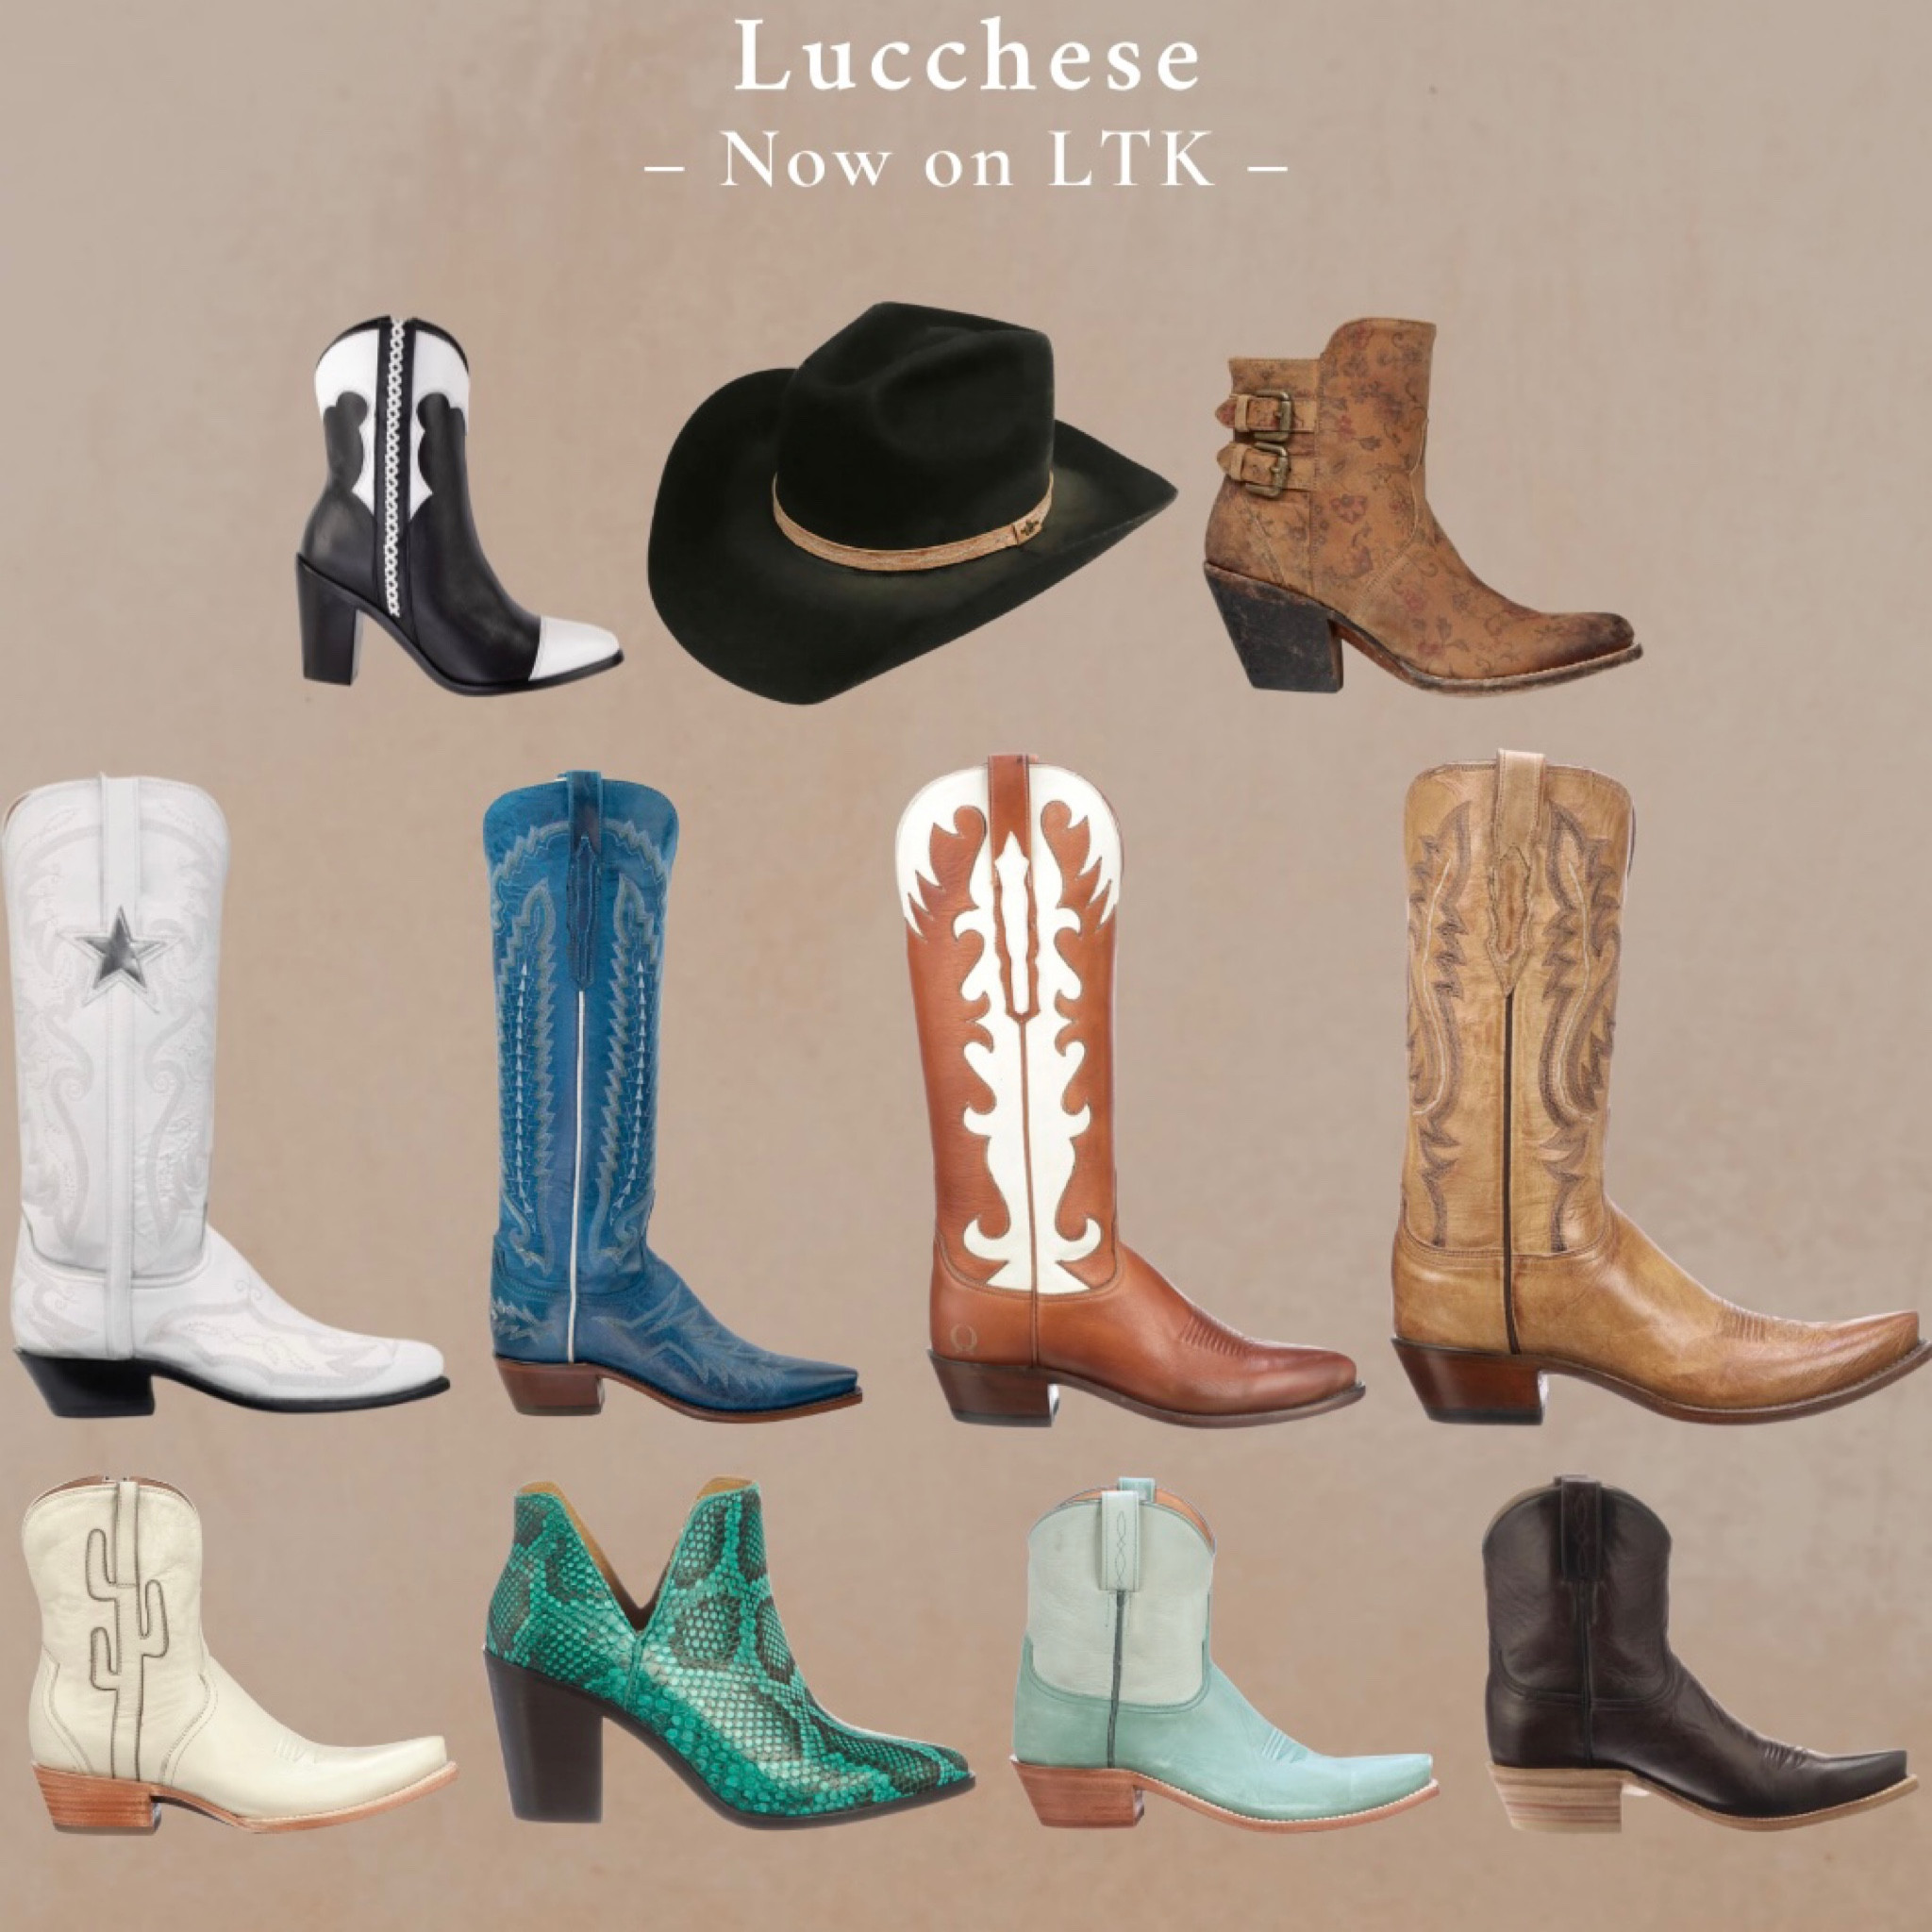 Days Gone By - Lucchese